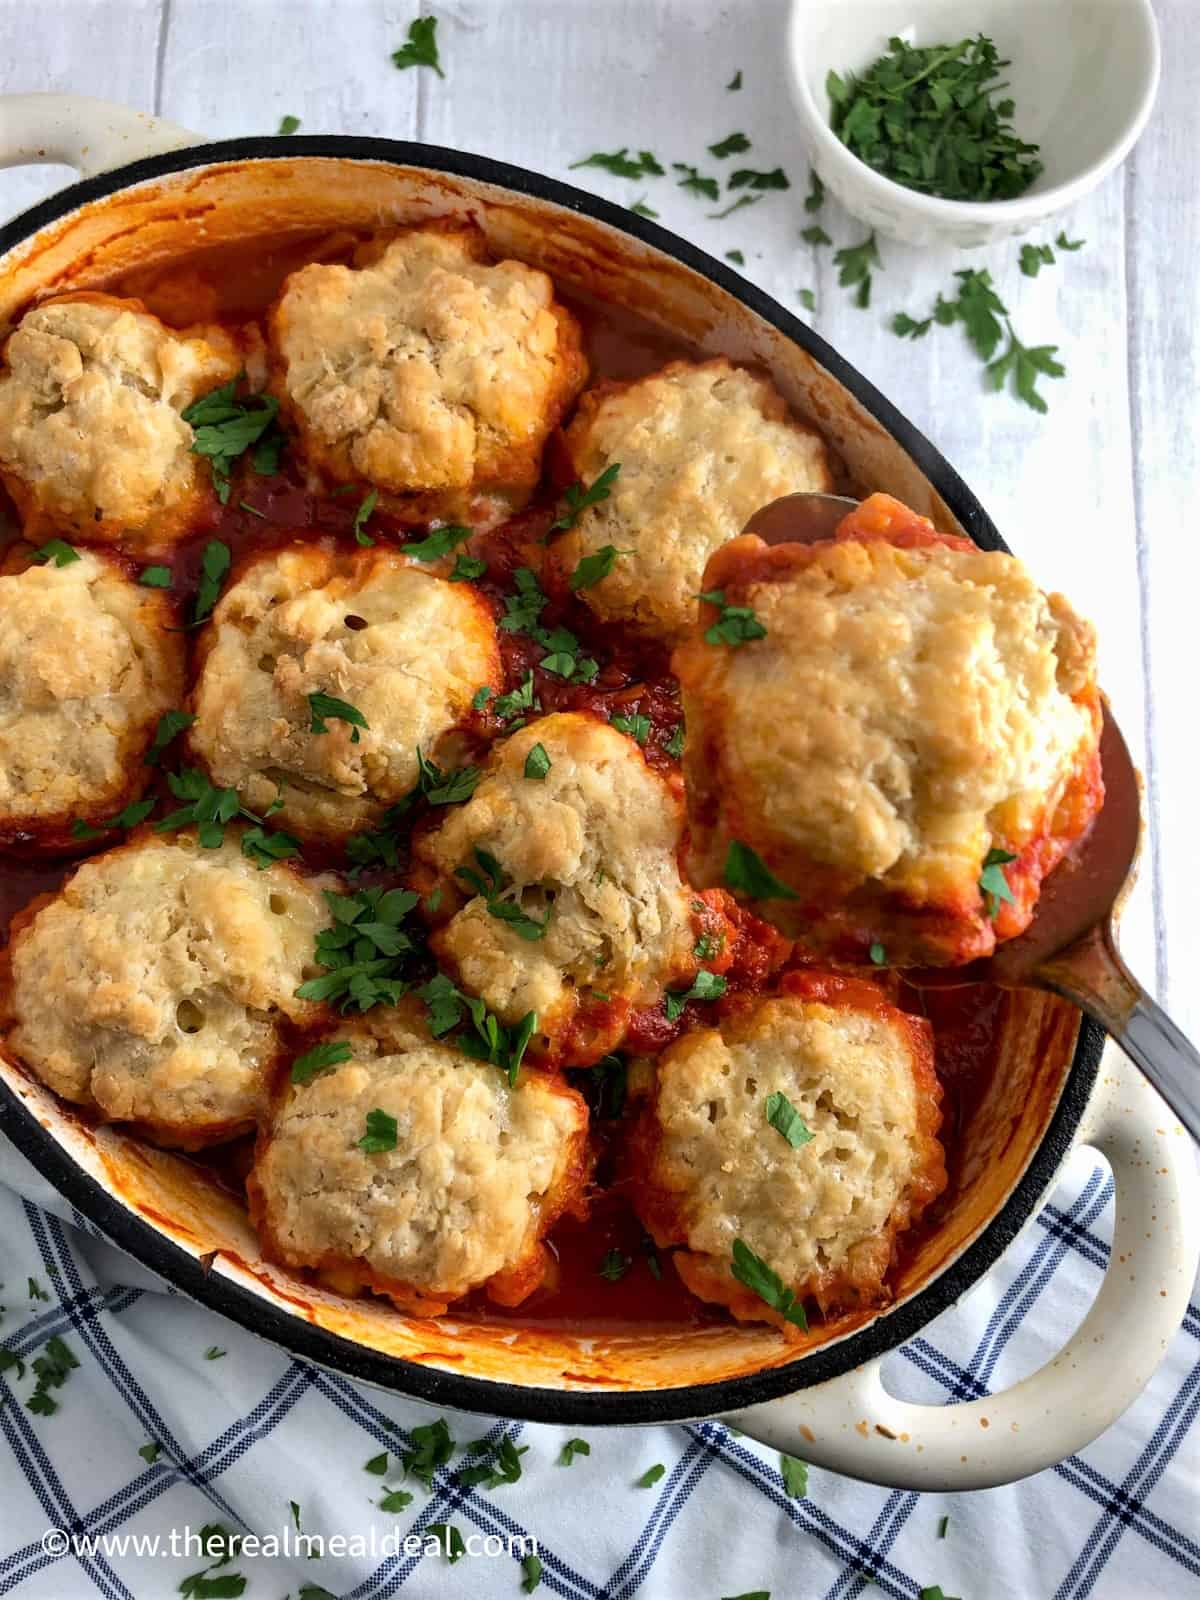 winter vegetable casserole with vegan dumplings in dish topped with fresh parsley with dumpling lifted up on spoon.